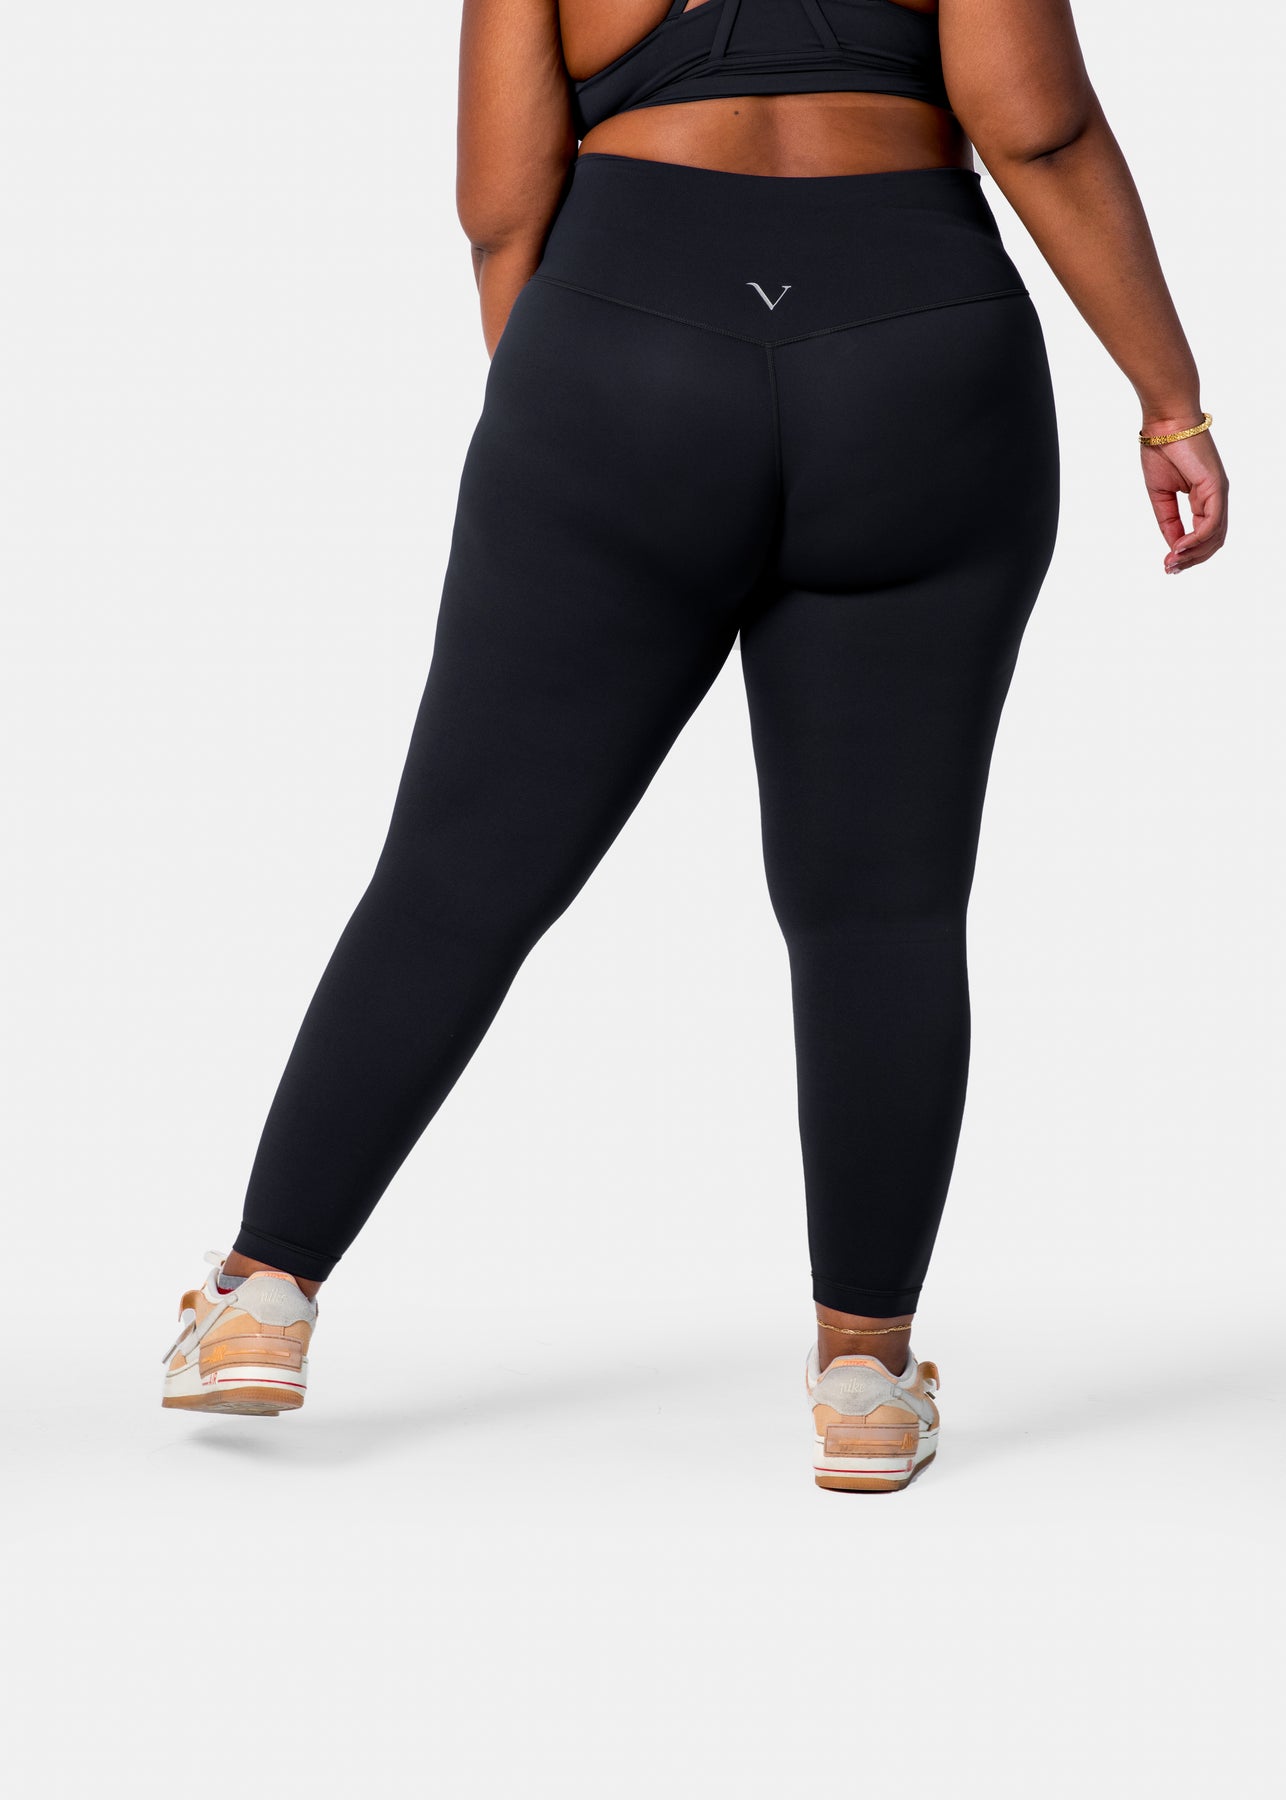 ♡ Cute Nike Fitness clothes, Women's Yoga